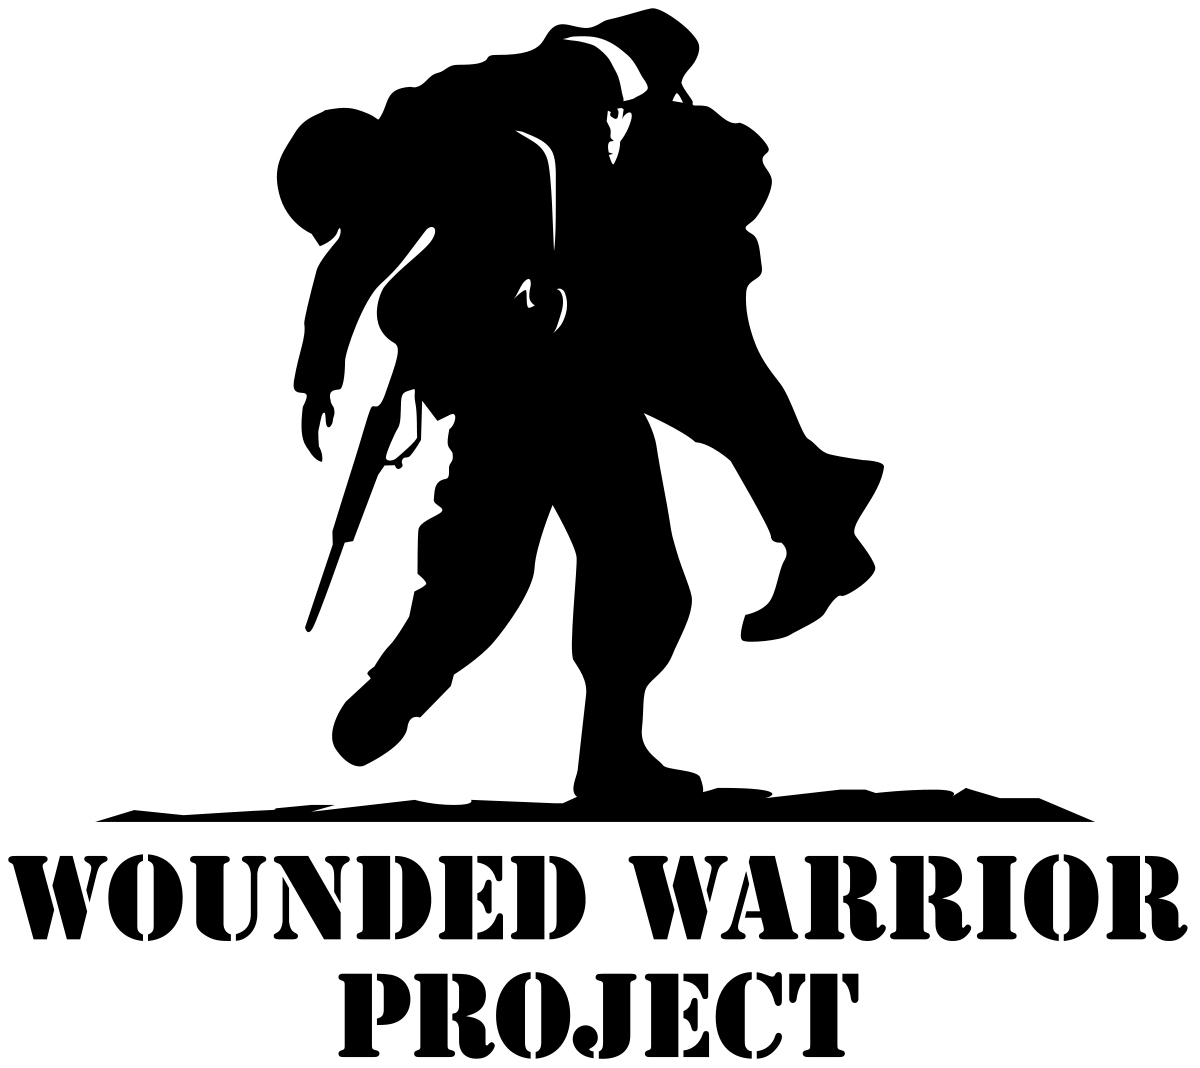 CANCO Employees Raise Money for Wounded Warrior Project